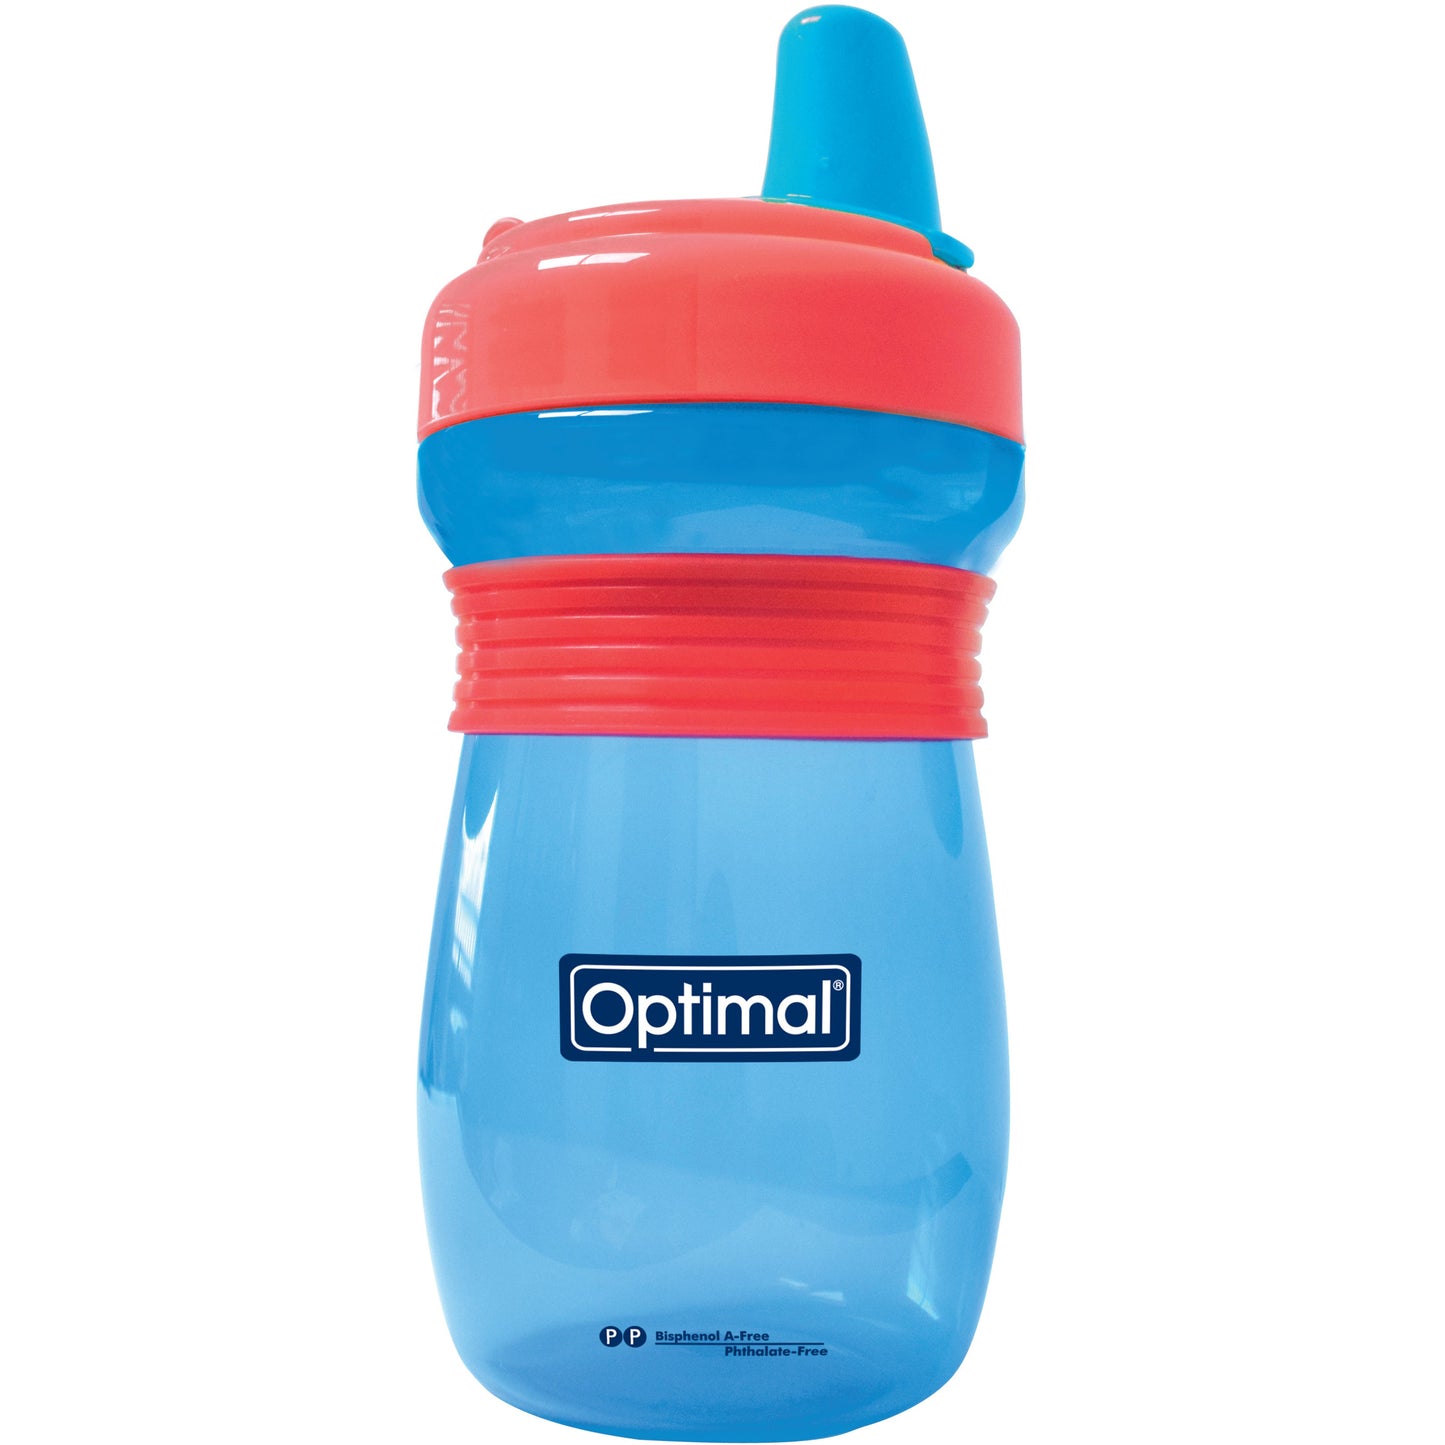 OPTIMAL Non Spill Feeding Bottle with Handle 300ml - Blue , Green